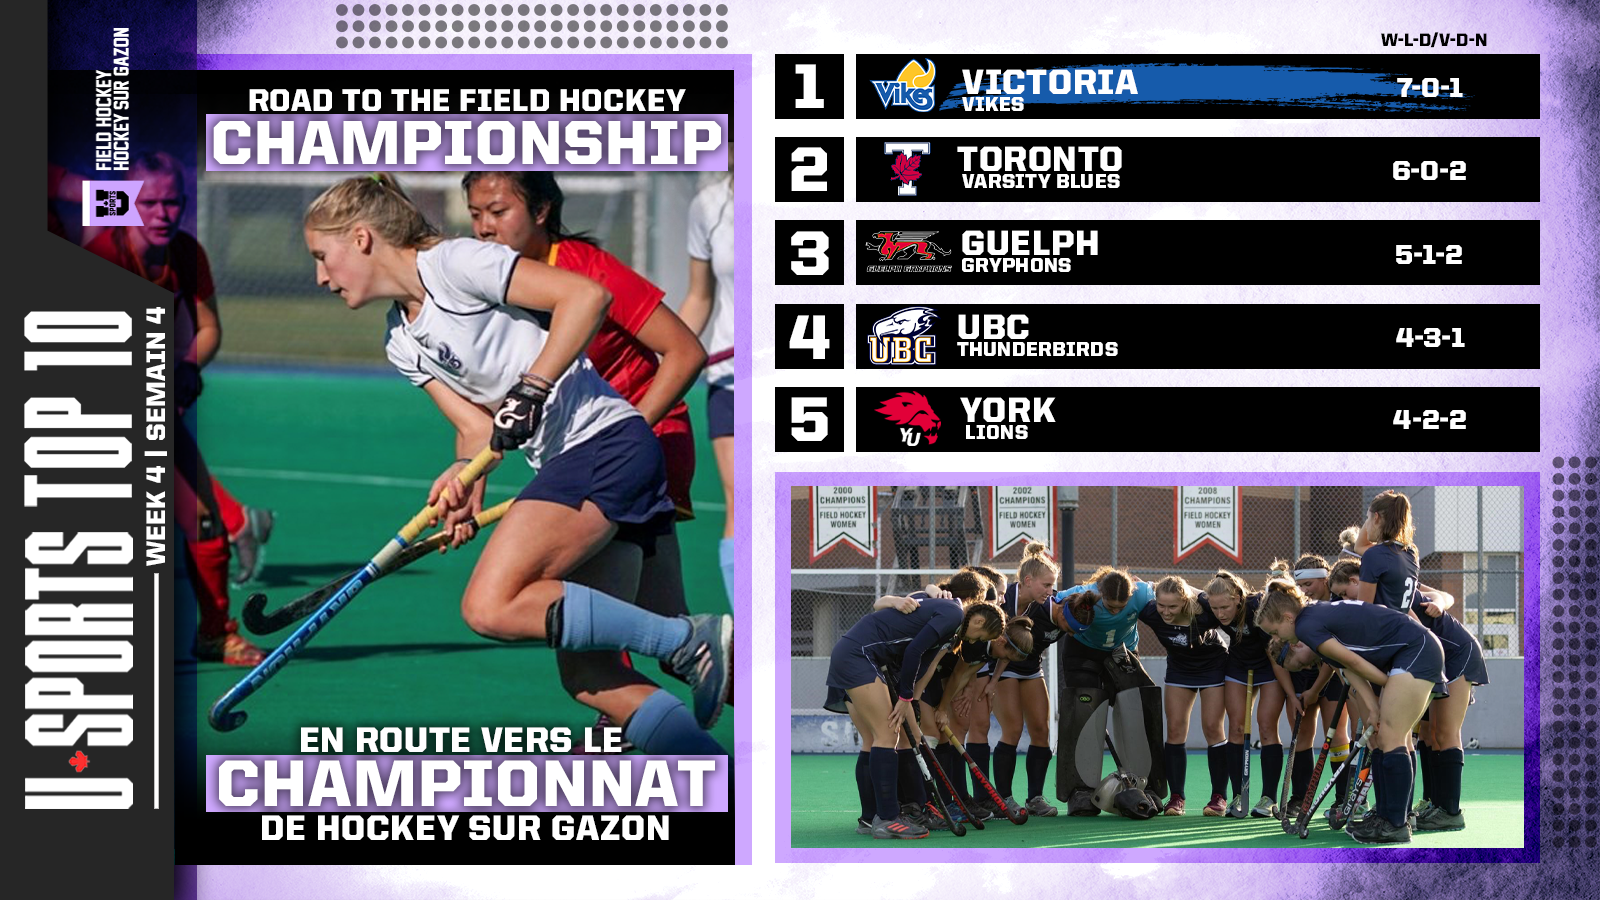 TOP_10_FHockeyWK4.png (1.53 MB)